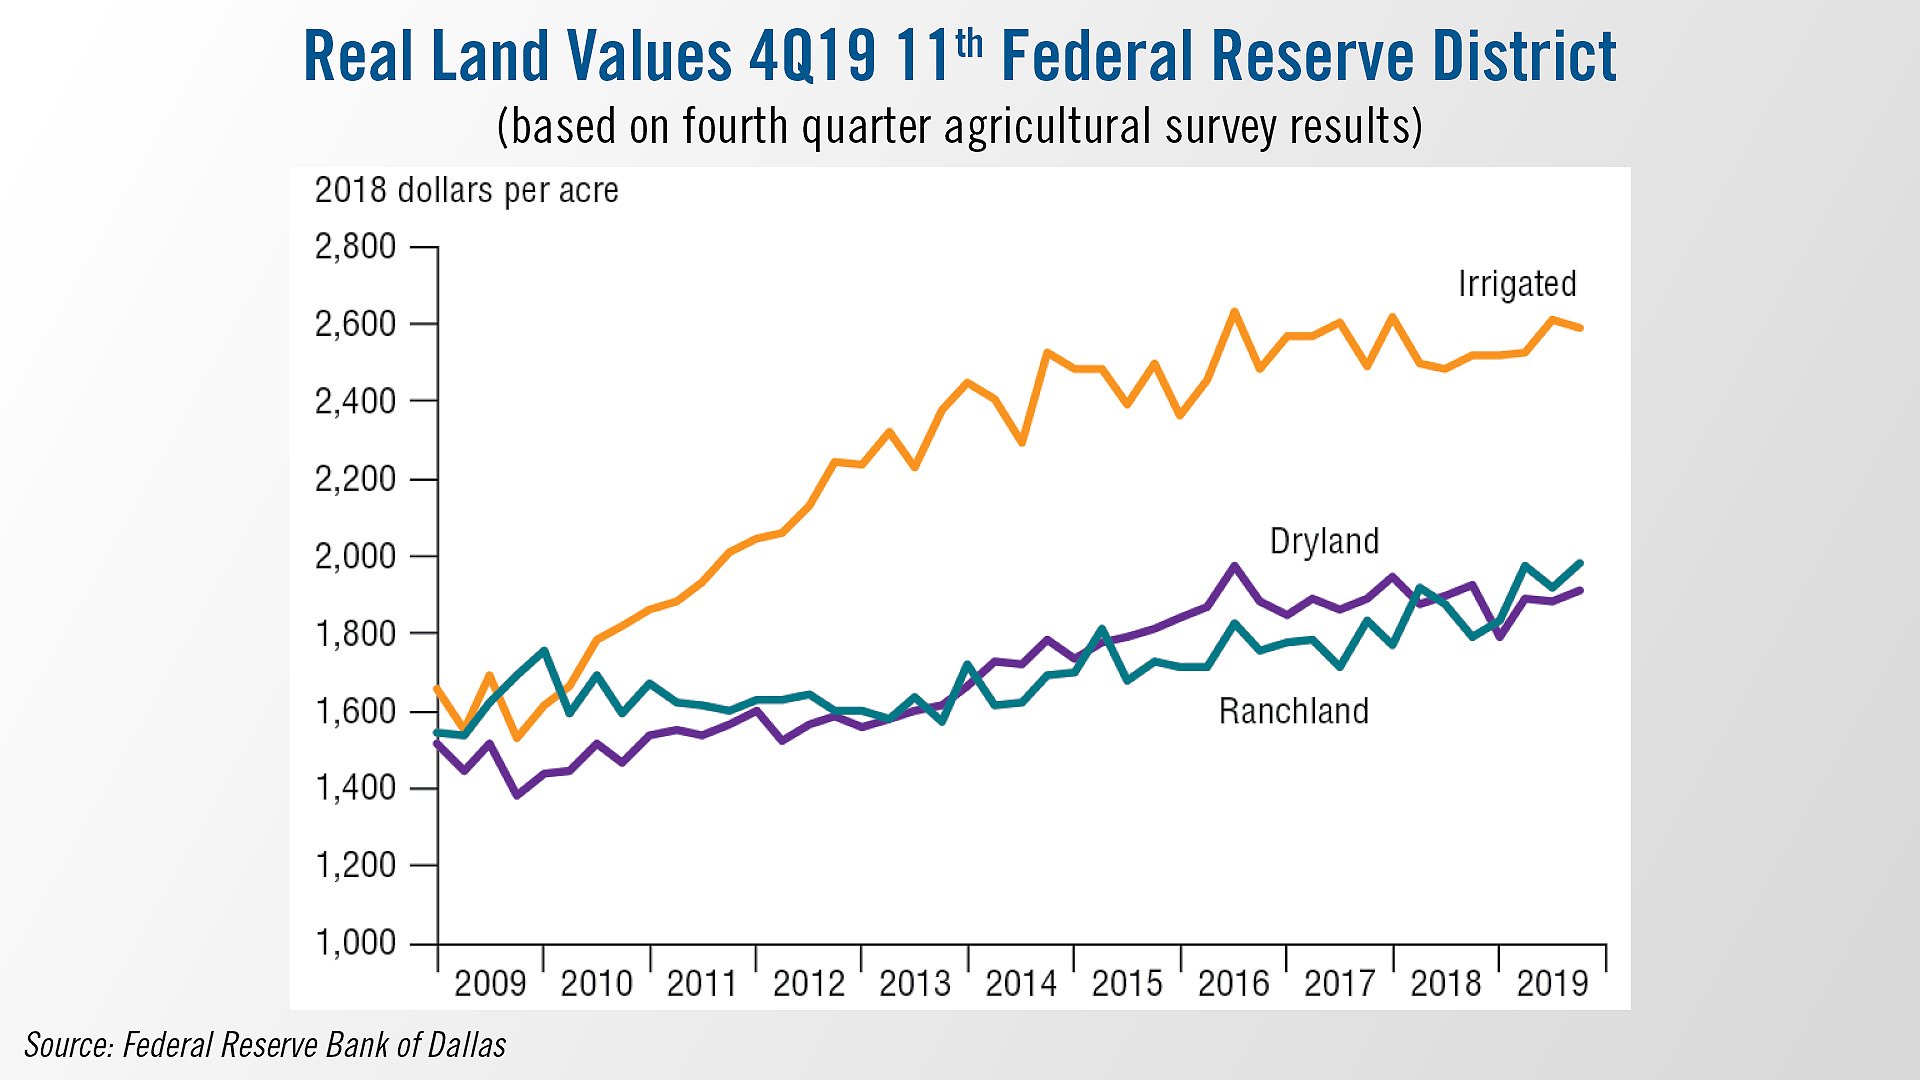 Real Land Values 4Q19 Eleventh Federal Reserve District